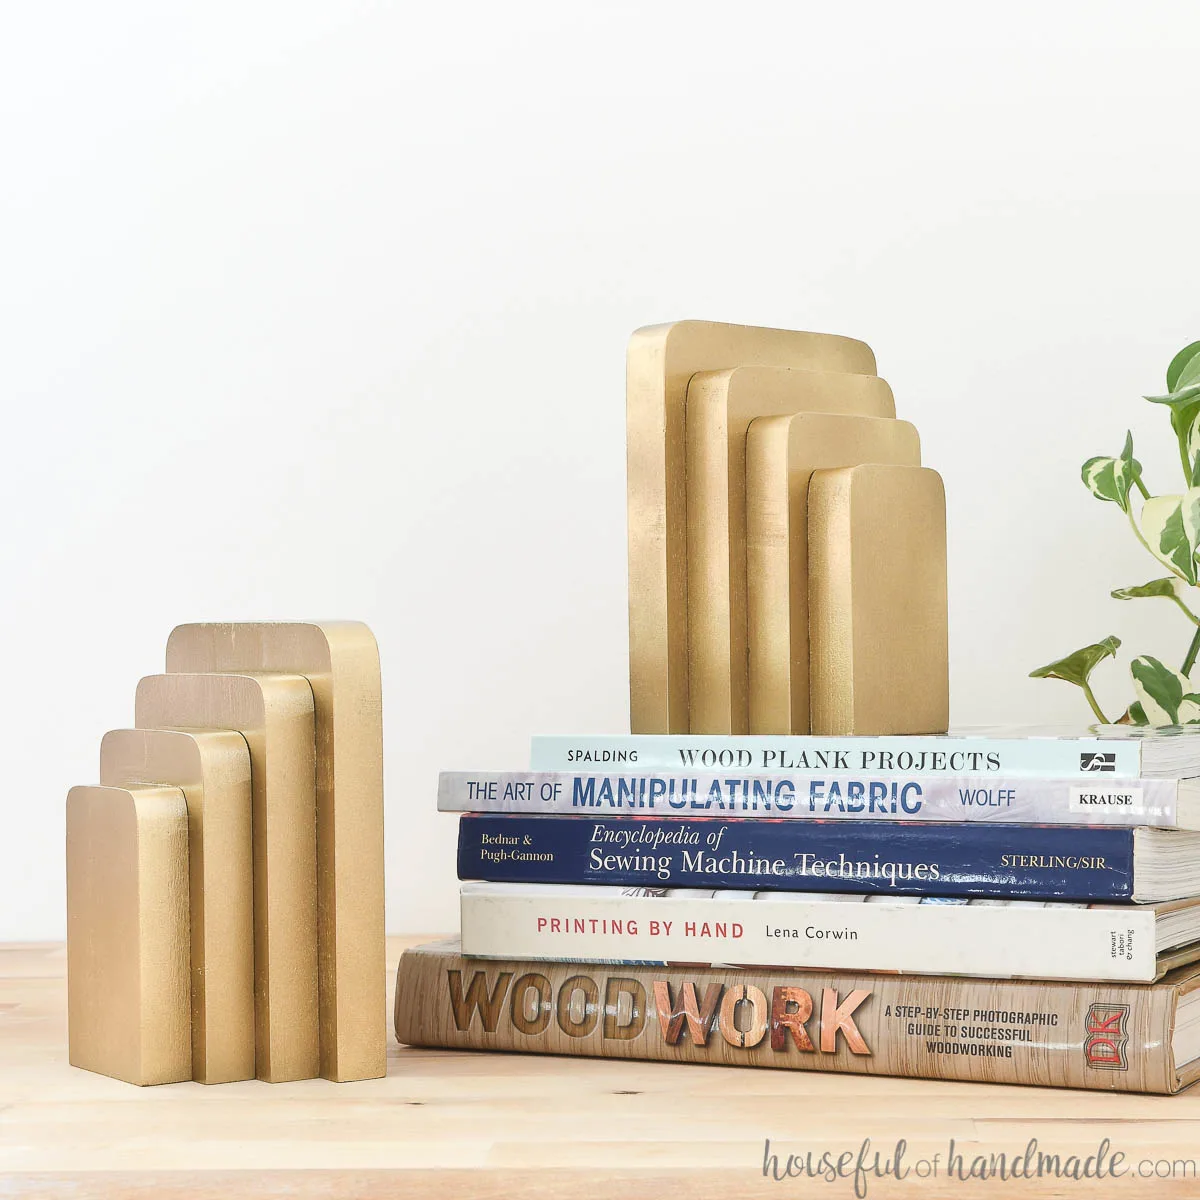 Two bookends made from wood displayed on top of a stack of books.